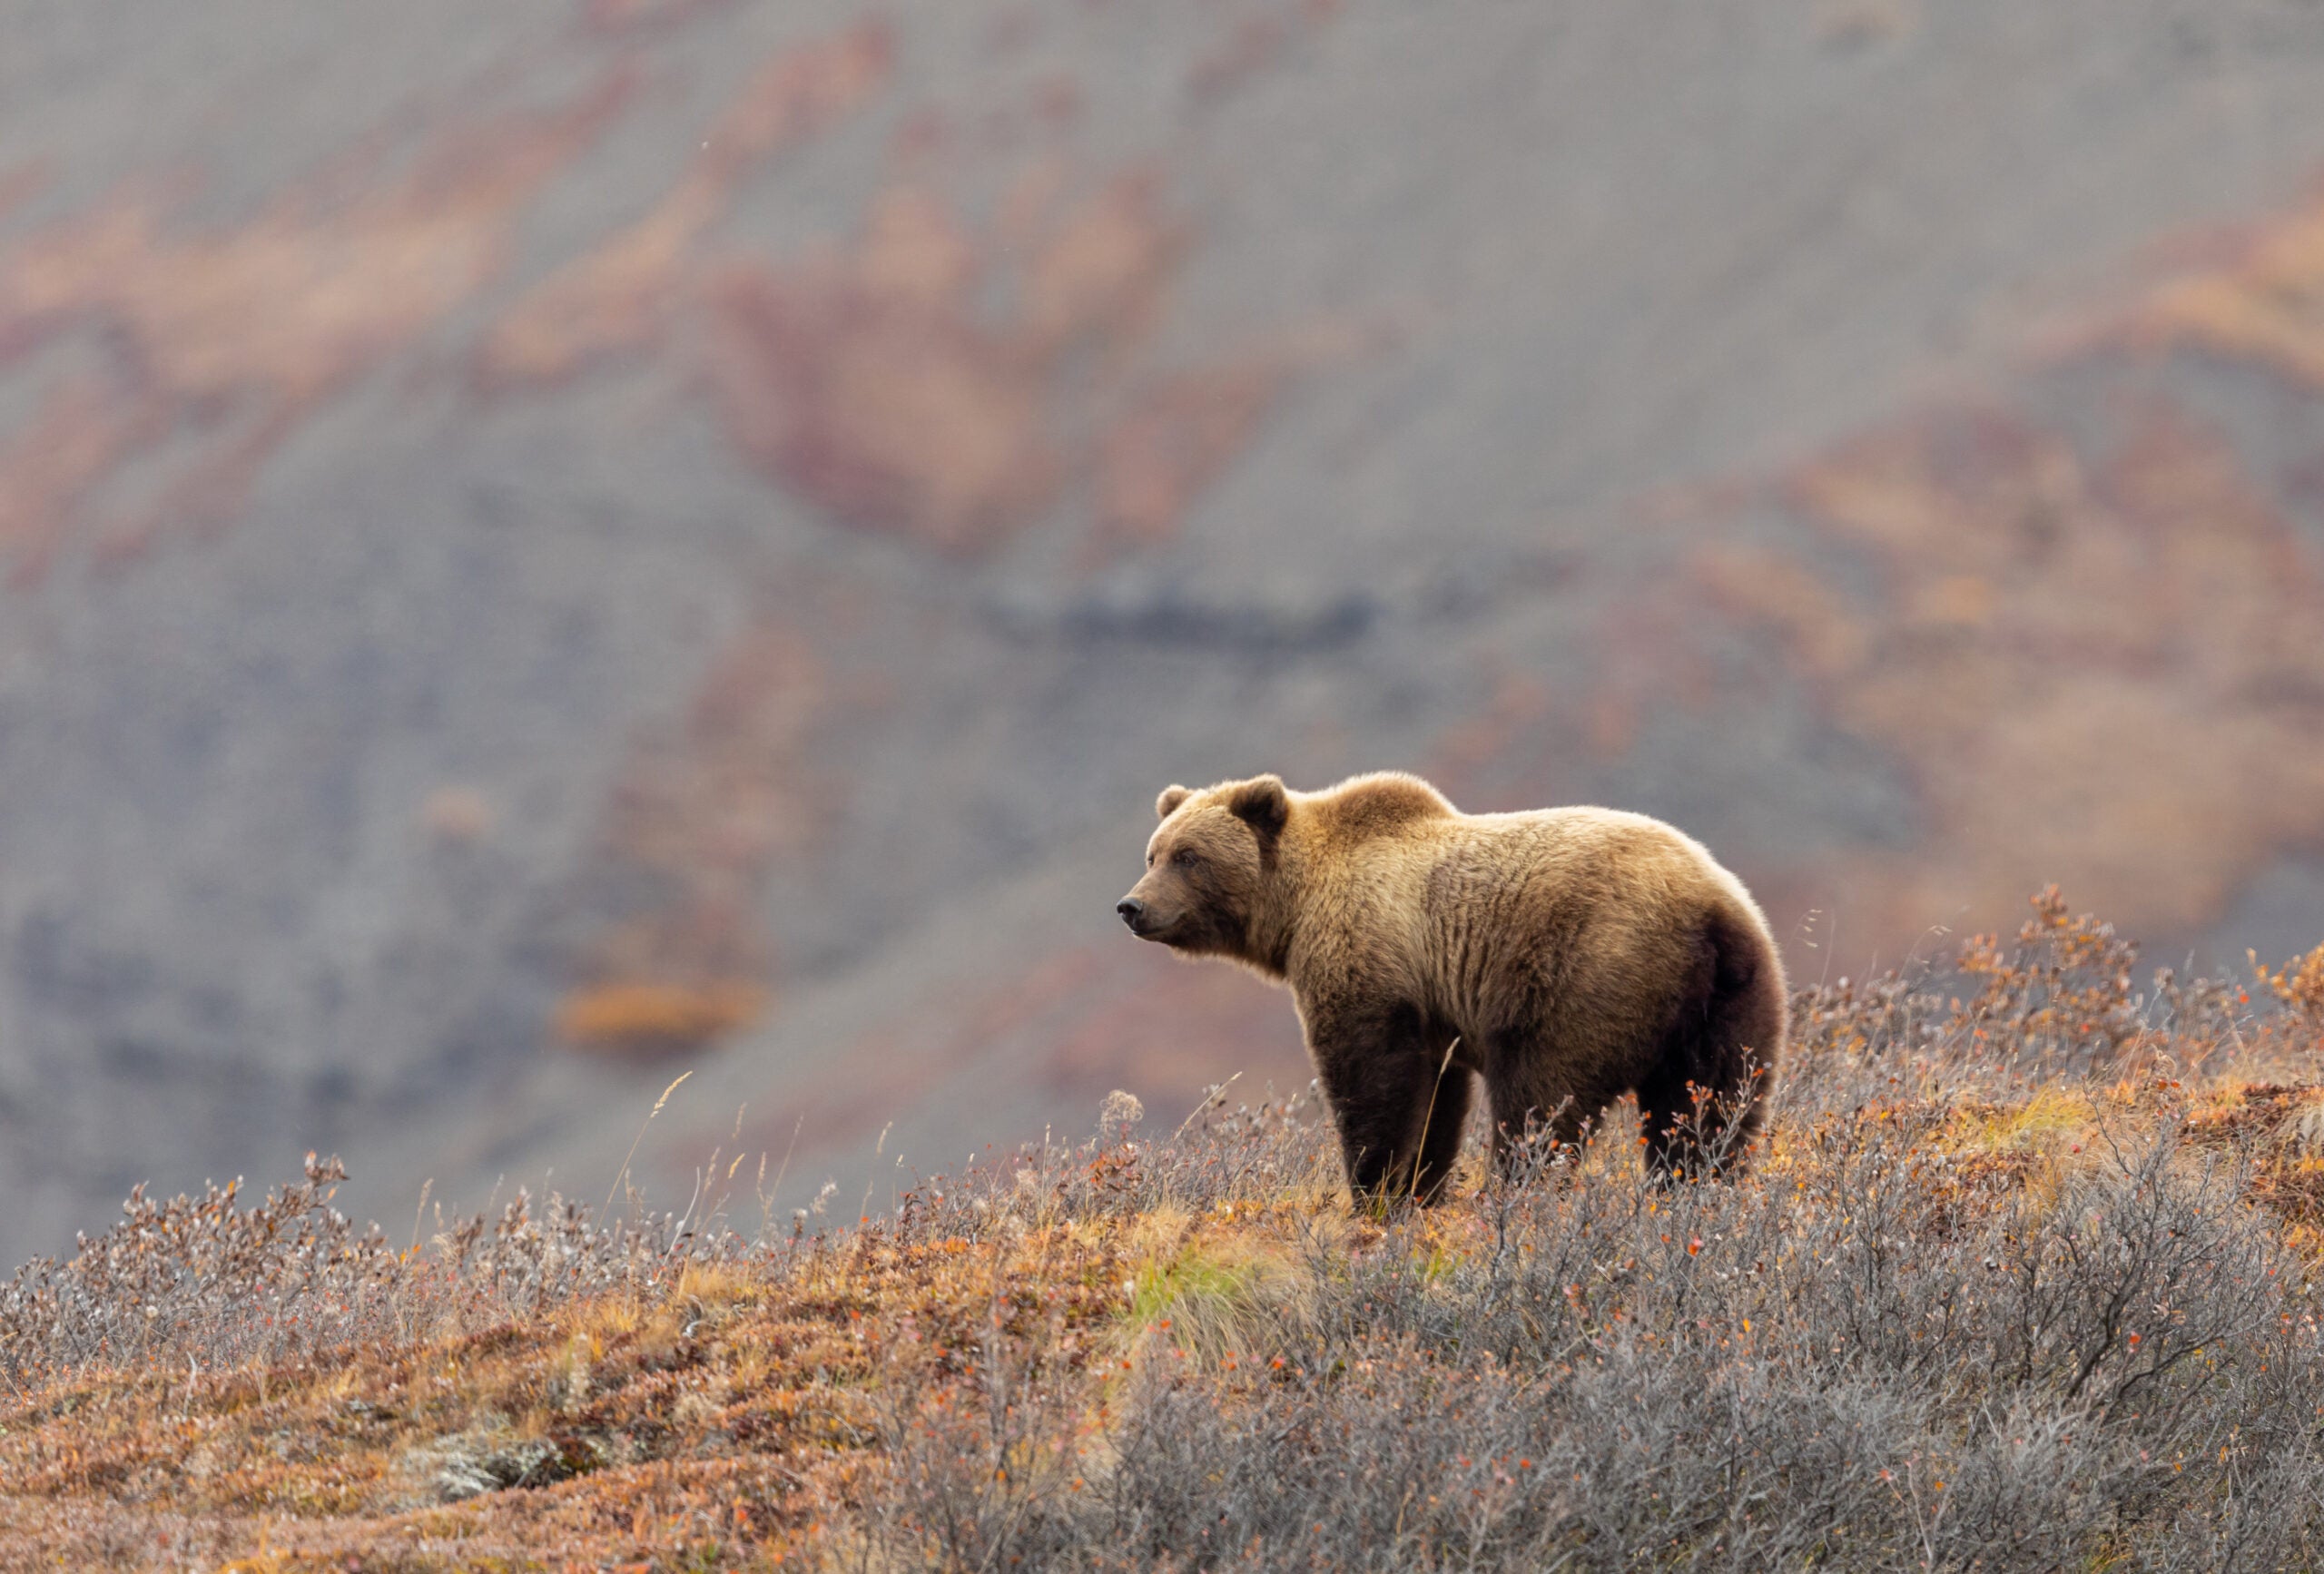 An inland grizzly stands on a steep grassy slope in Delani National Park, Alaska.